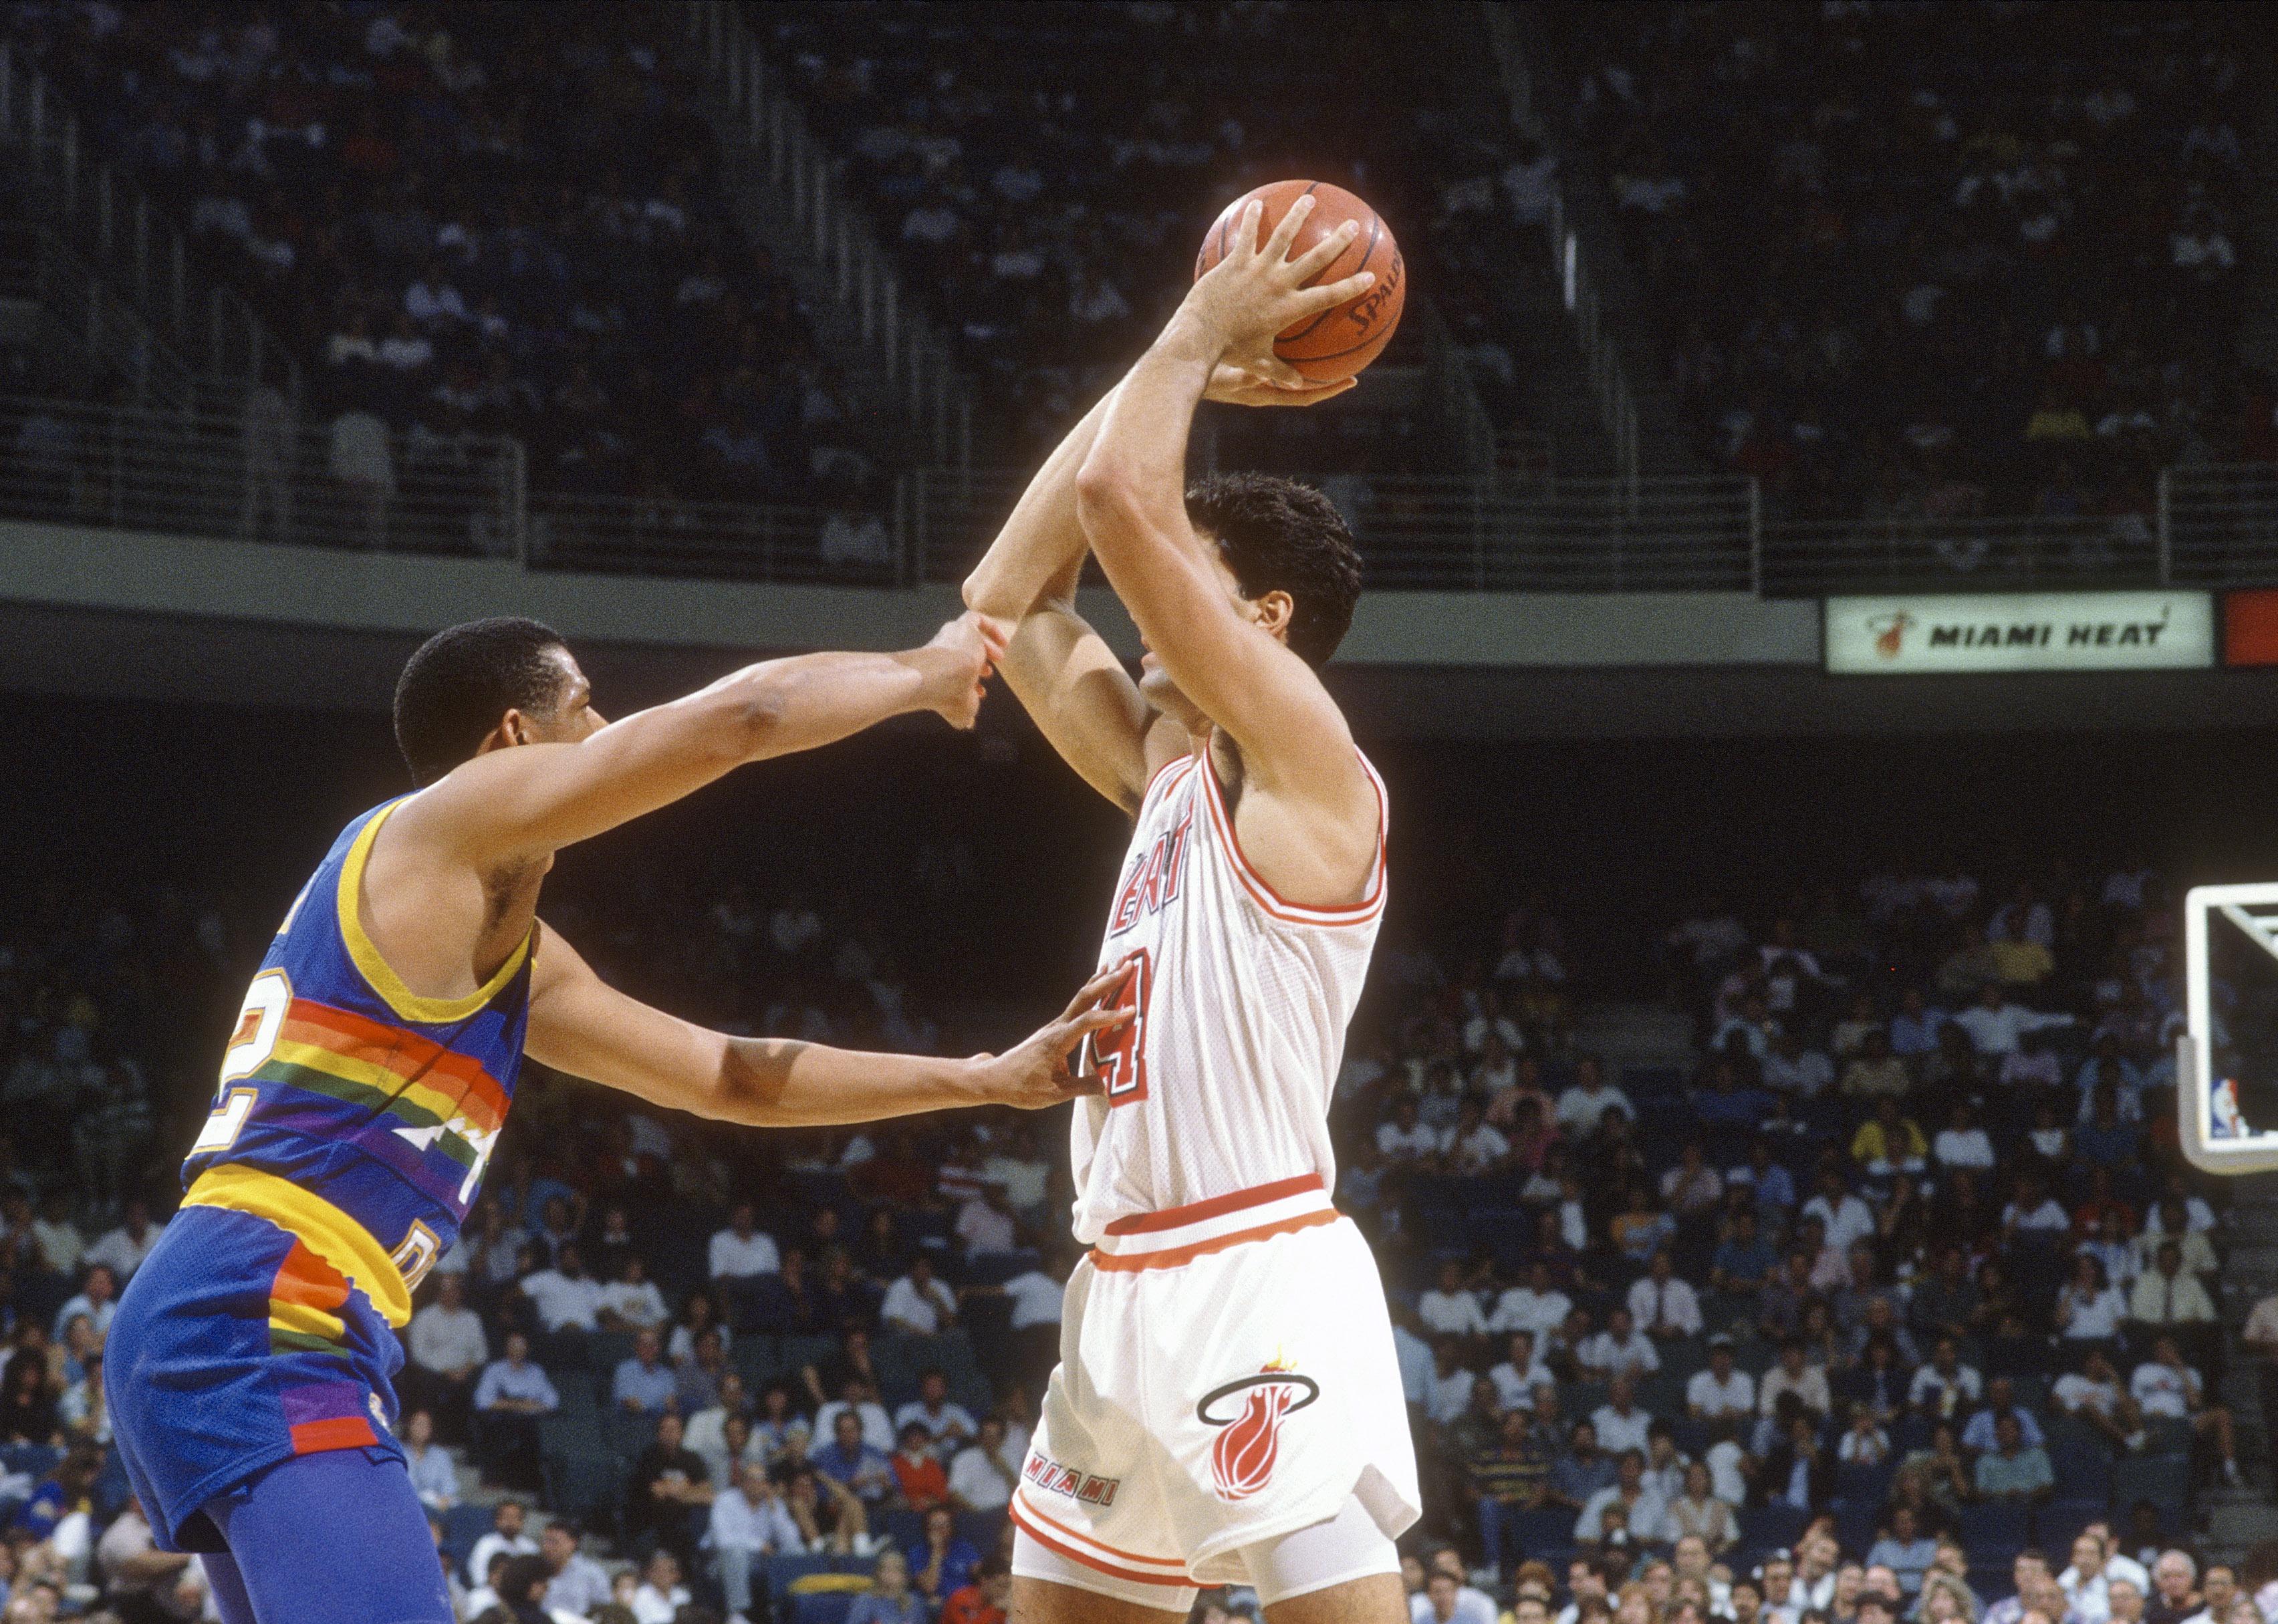 Rony Seikaly ready to pass the ball during an game at the Miami Arena.